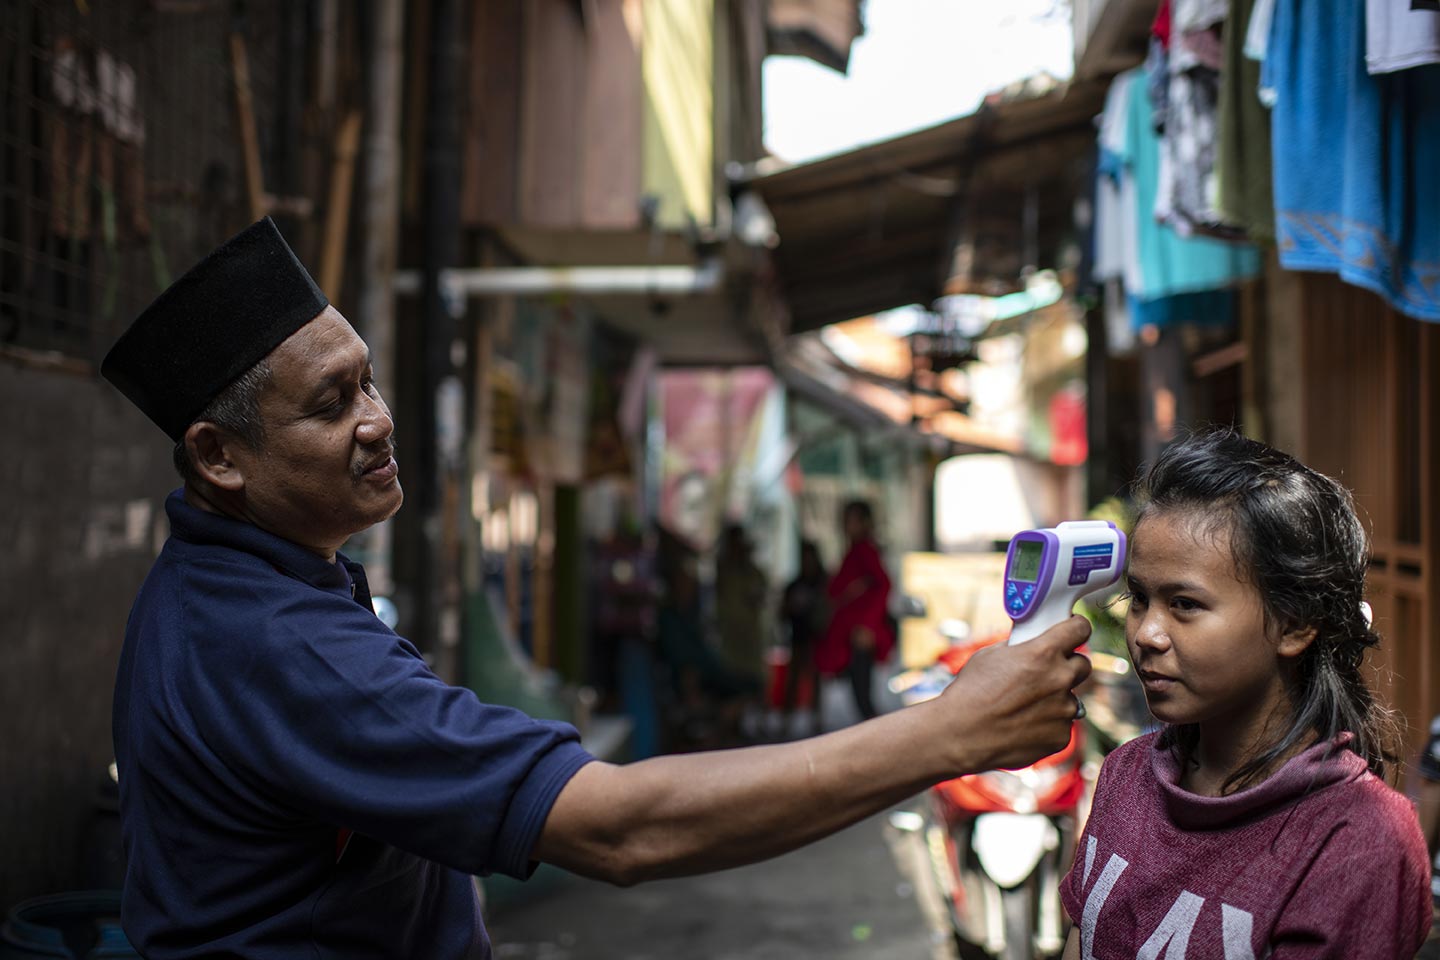 Sudirman, 55, head of RT (left) is checking Zahra temperature during the Covid-19 outbreak in slum area in West Jakarta, Indonesia on 1 April, 2020. Credit: UNICEF/2020/Arimacs Wilander